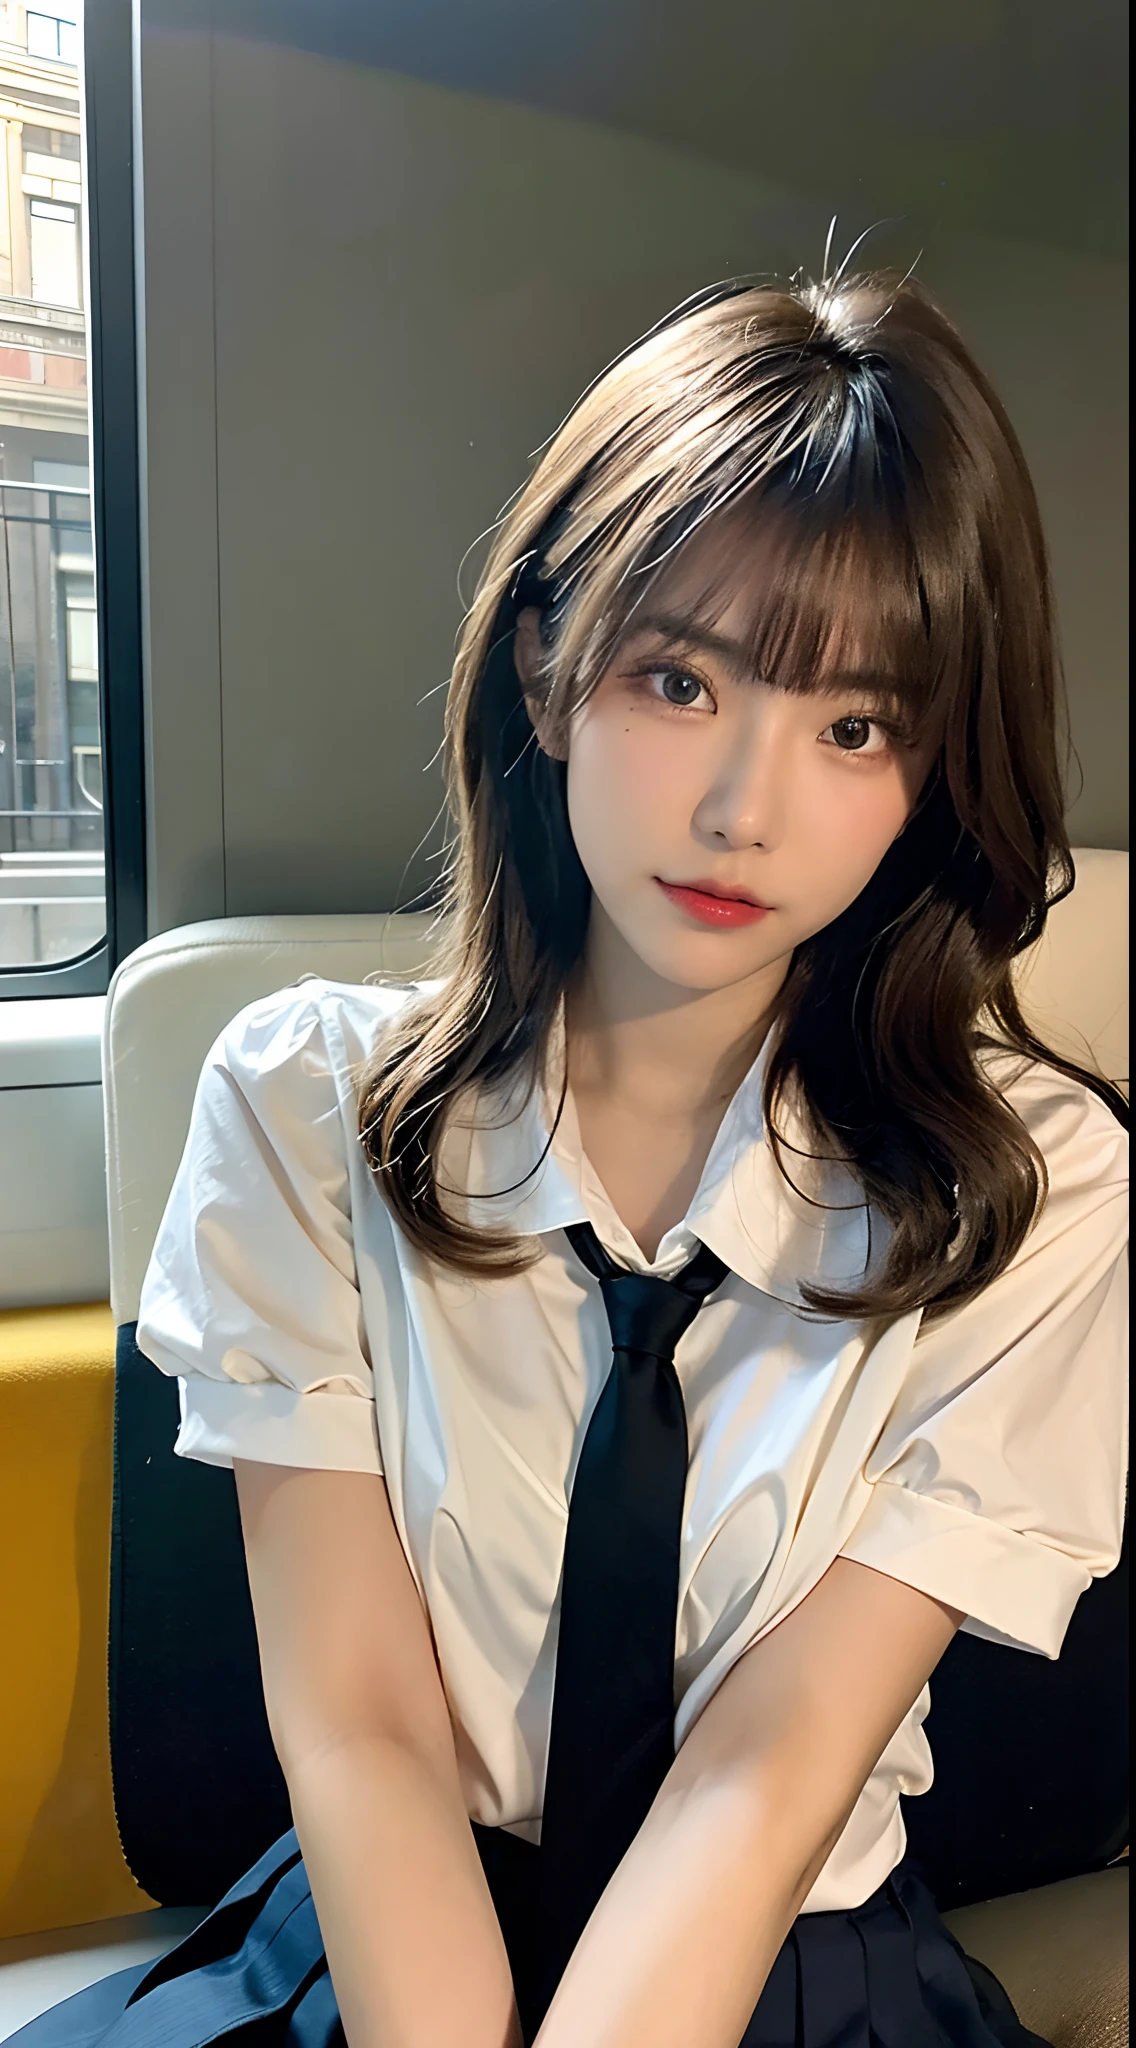 (masterpiece, bestquality:1.2), 10, 15 me, 85 mm., official art, RAW photo, Absurd, white blouse, pretty face, Up Close, Upper body, Violaceaess, Gardenia, beautiful girl, , (Navy pleated skirt:1.1), Curly waist, thights, short sleeves, In the train, Sit on the bench seat.........., looking at the audience, no makeup, (smile:0.4), grain of film, Chromatic aberration, crisp focus, face lights, Clear lighting, adolescent, detailed face, Bokeh background, (Dark red tie:1.1)